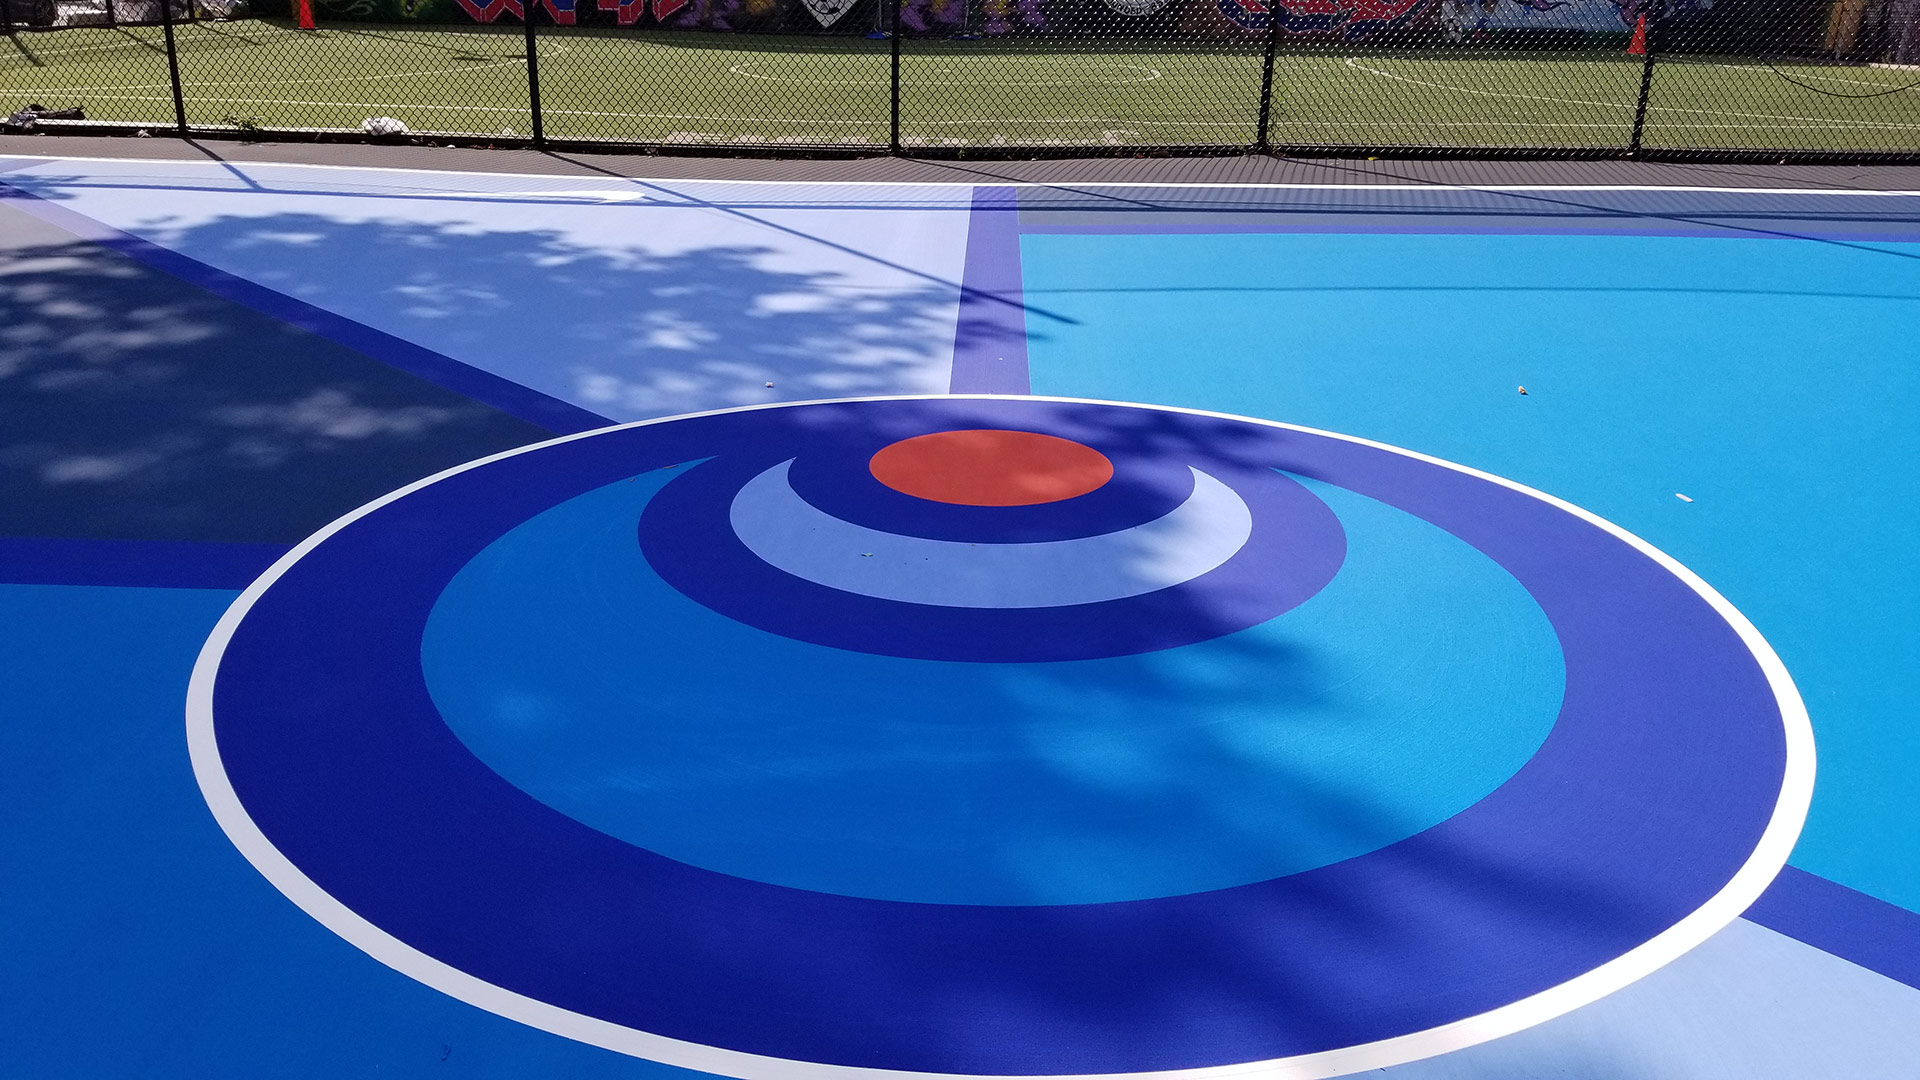 Outdoor court at Dunlevy Milbank Center in New York, NY